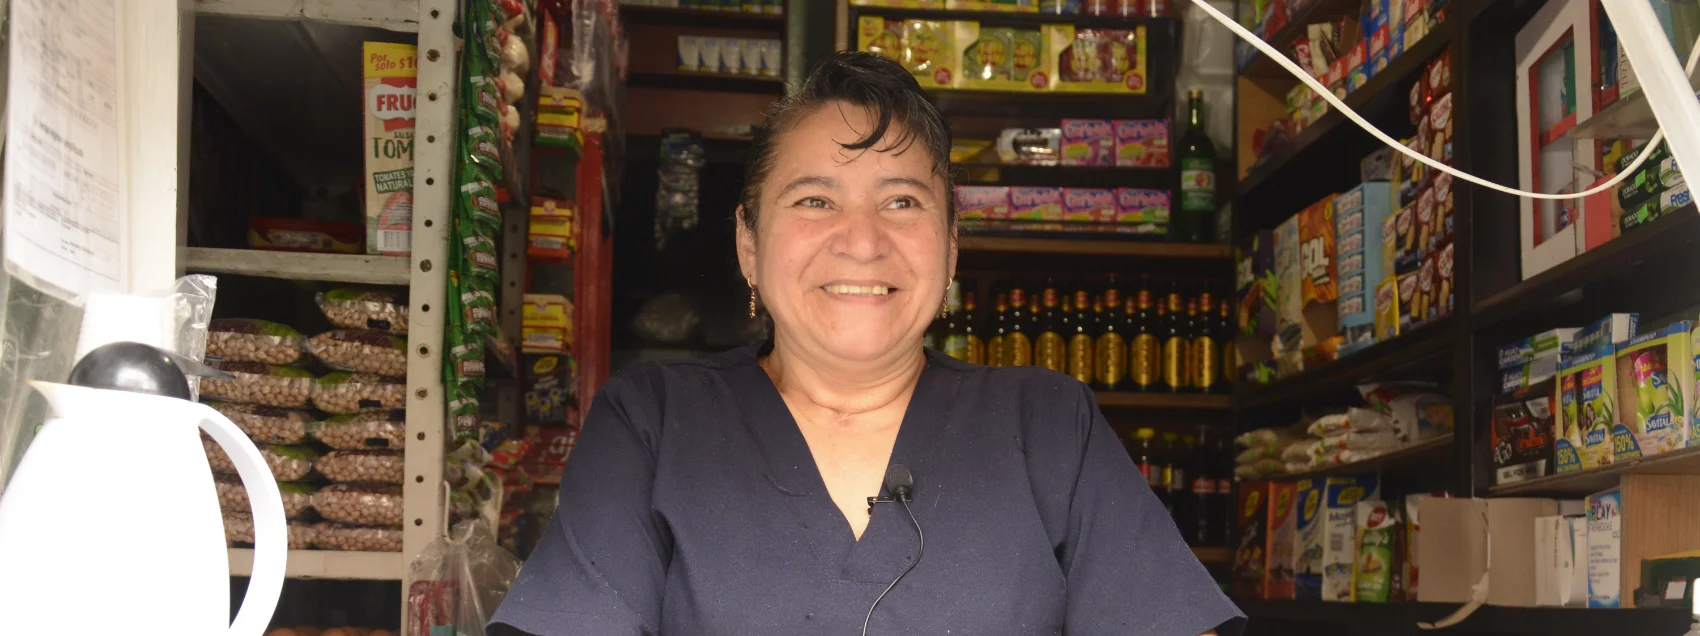 A shopkeeper behind the counter in Colombia